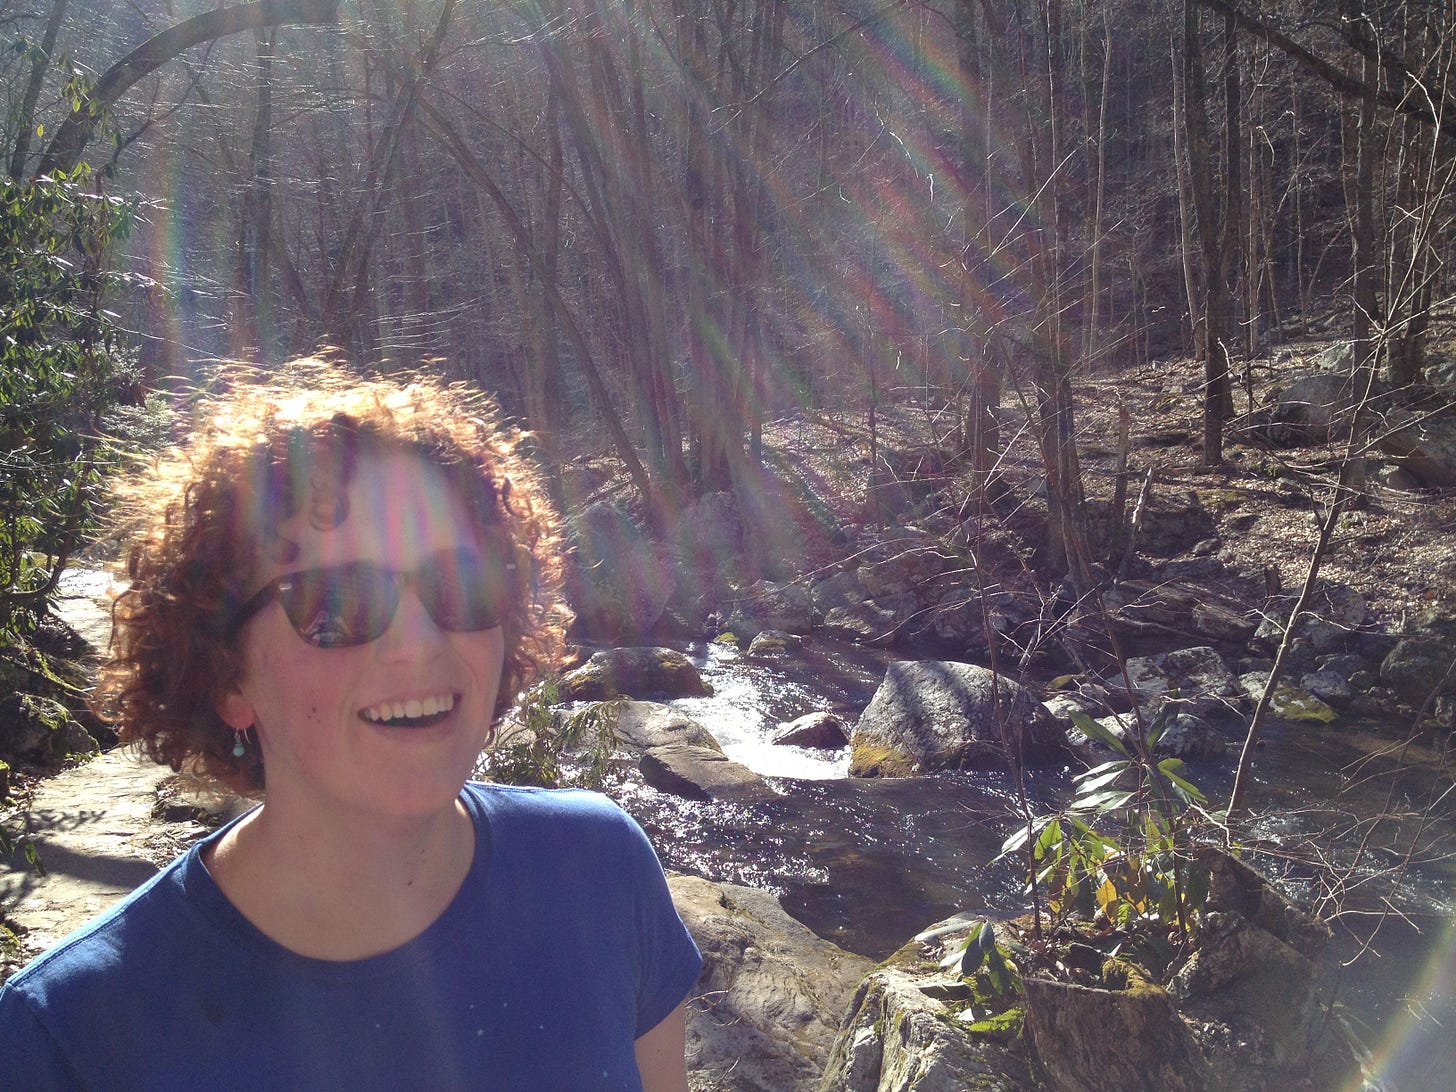 Joan wears sunglasses and a big smile. The sun and a rainbow glow across her. They stand in a forest, a creek runs beside them.